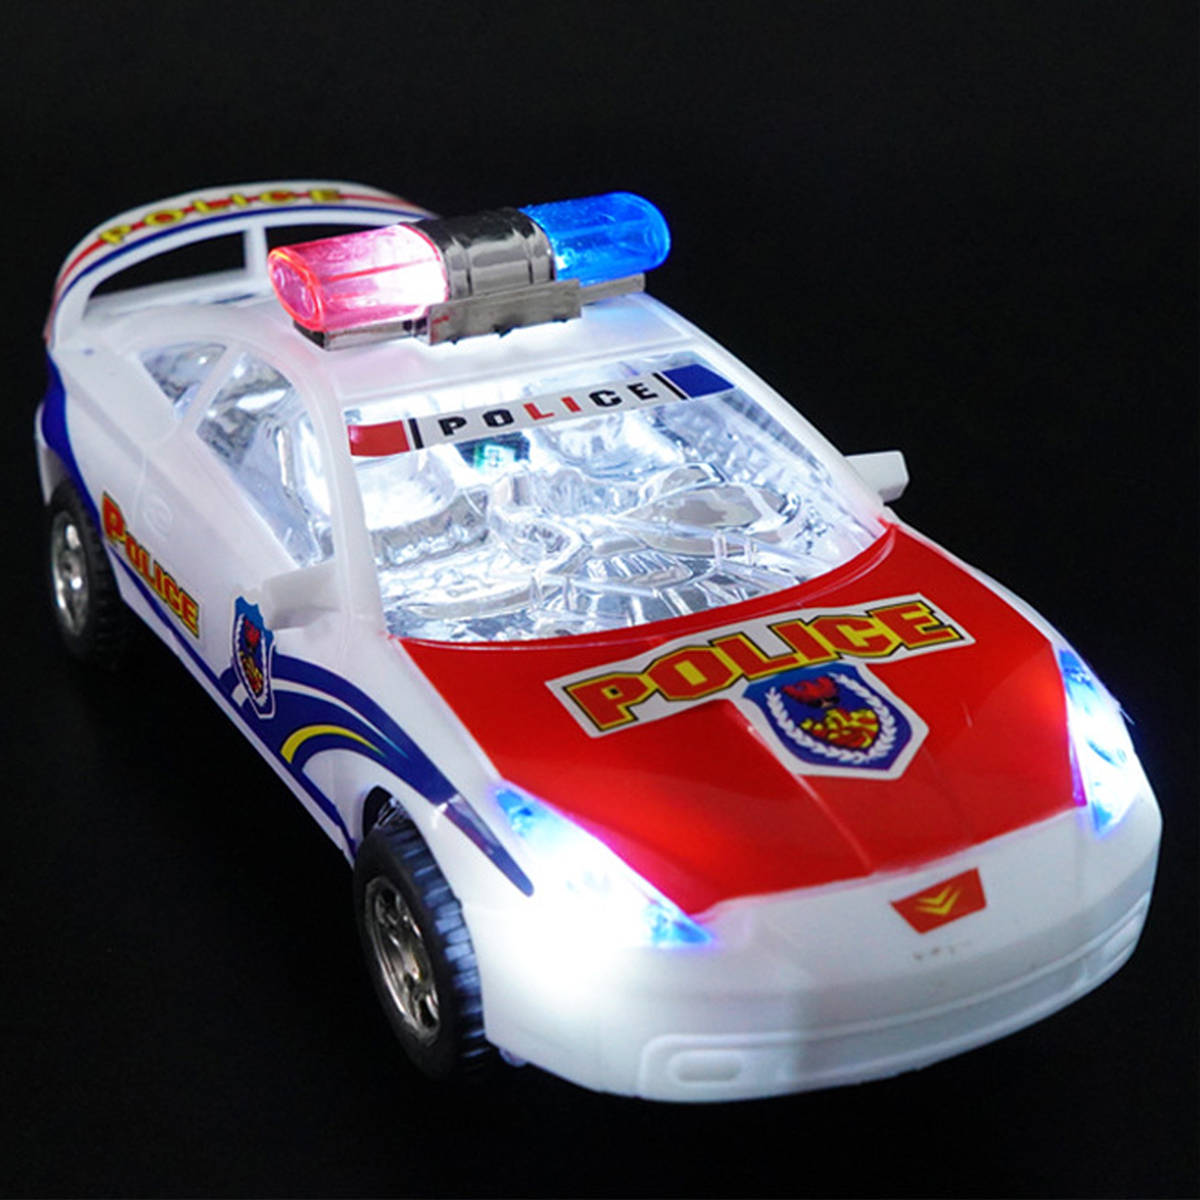 Childrens-Electric-Alloy-Simulation-Po-lice-Car-Diecast-Model-Toy-with-LED-Light-and-Music-1604579-9